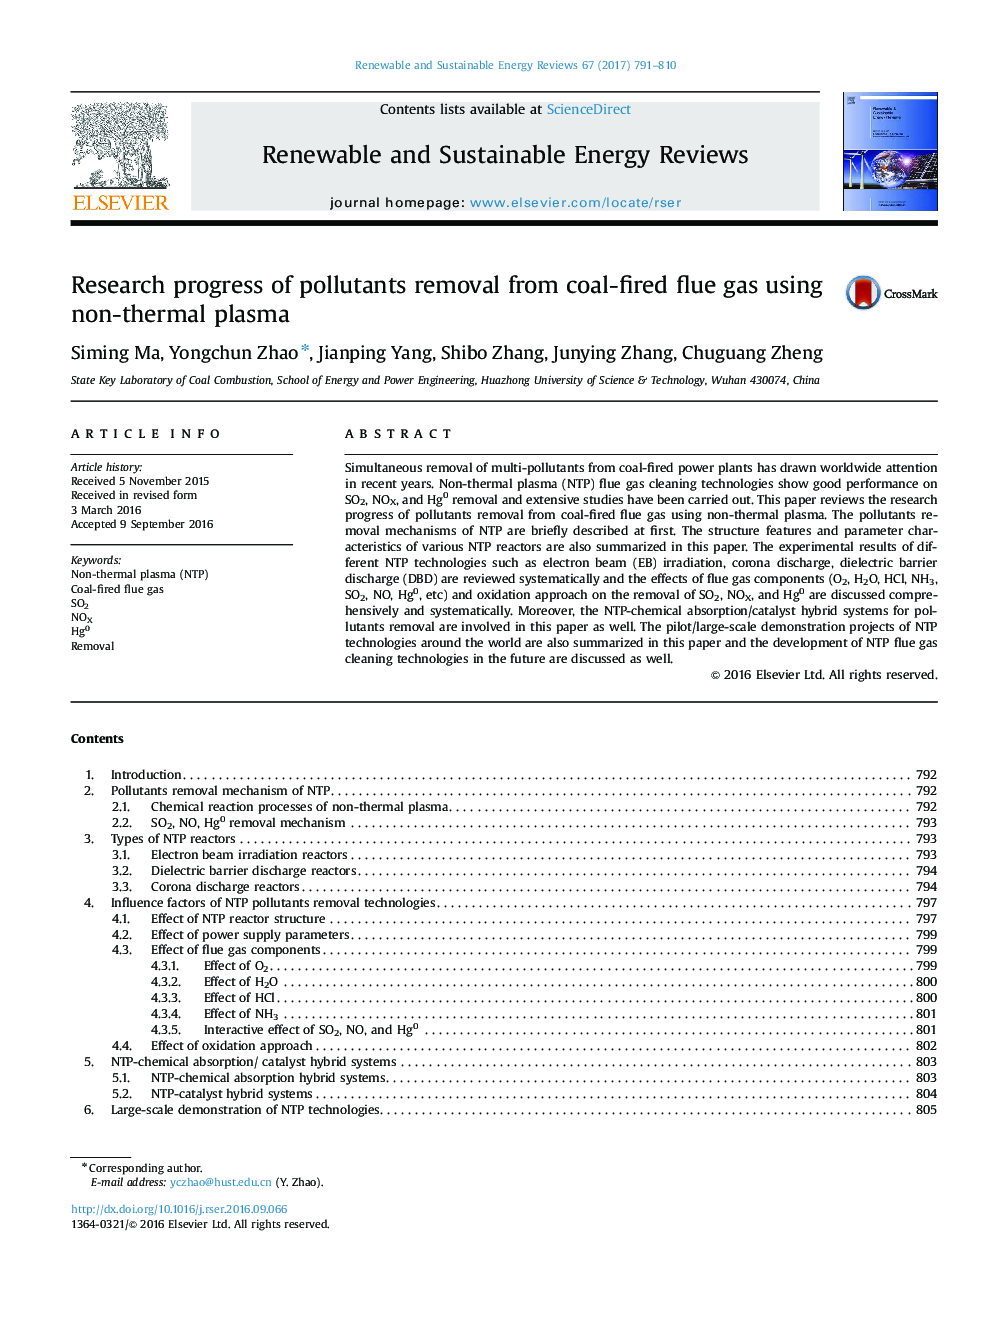 Research progress of pollutants removal from coal-fired flue gas using non-thermal plasma